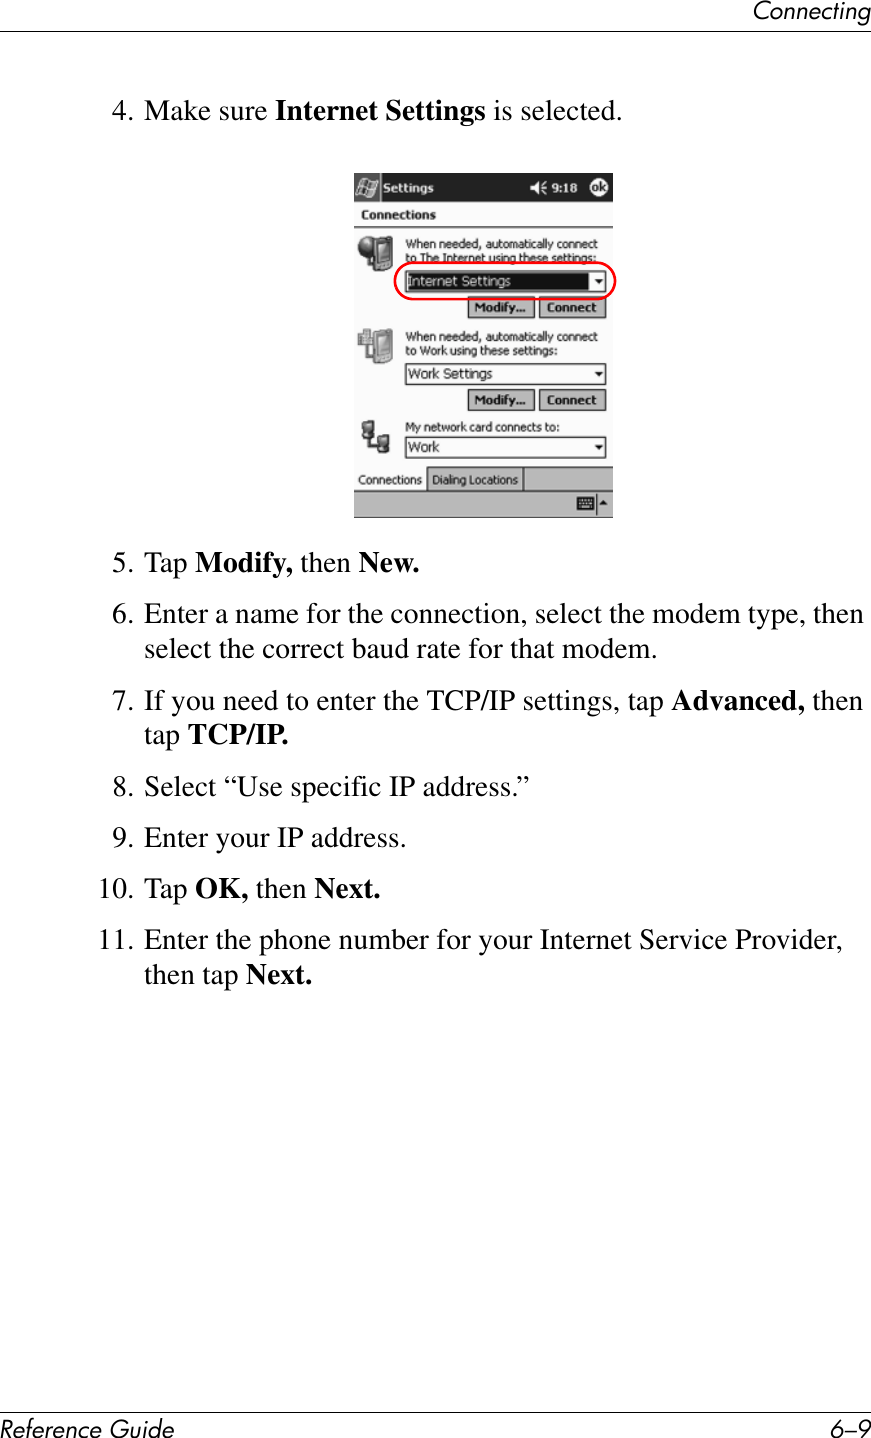 67%%&quot;&amp;1*%2!&quot;#&quot;$&quot;%&amp;&quot;&apos;()*+&quot; E/H4. Make sure Internet Settings is selected.5. Tap Modify, then New.6. Enter a name for the connection, select the modem type, then select the correct baud rate for that modem.7. If you need to enter the TCP/IP settings, tap Advanced, then tap TCP/IP.8. Select “Use specific IP address.”9. Enter your IP address.10. Tap OK, then Next.11. Enter the phone number for your Internet Service Provider, then tap Next.